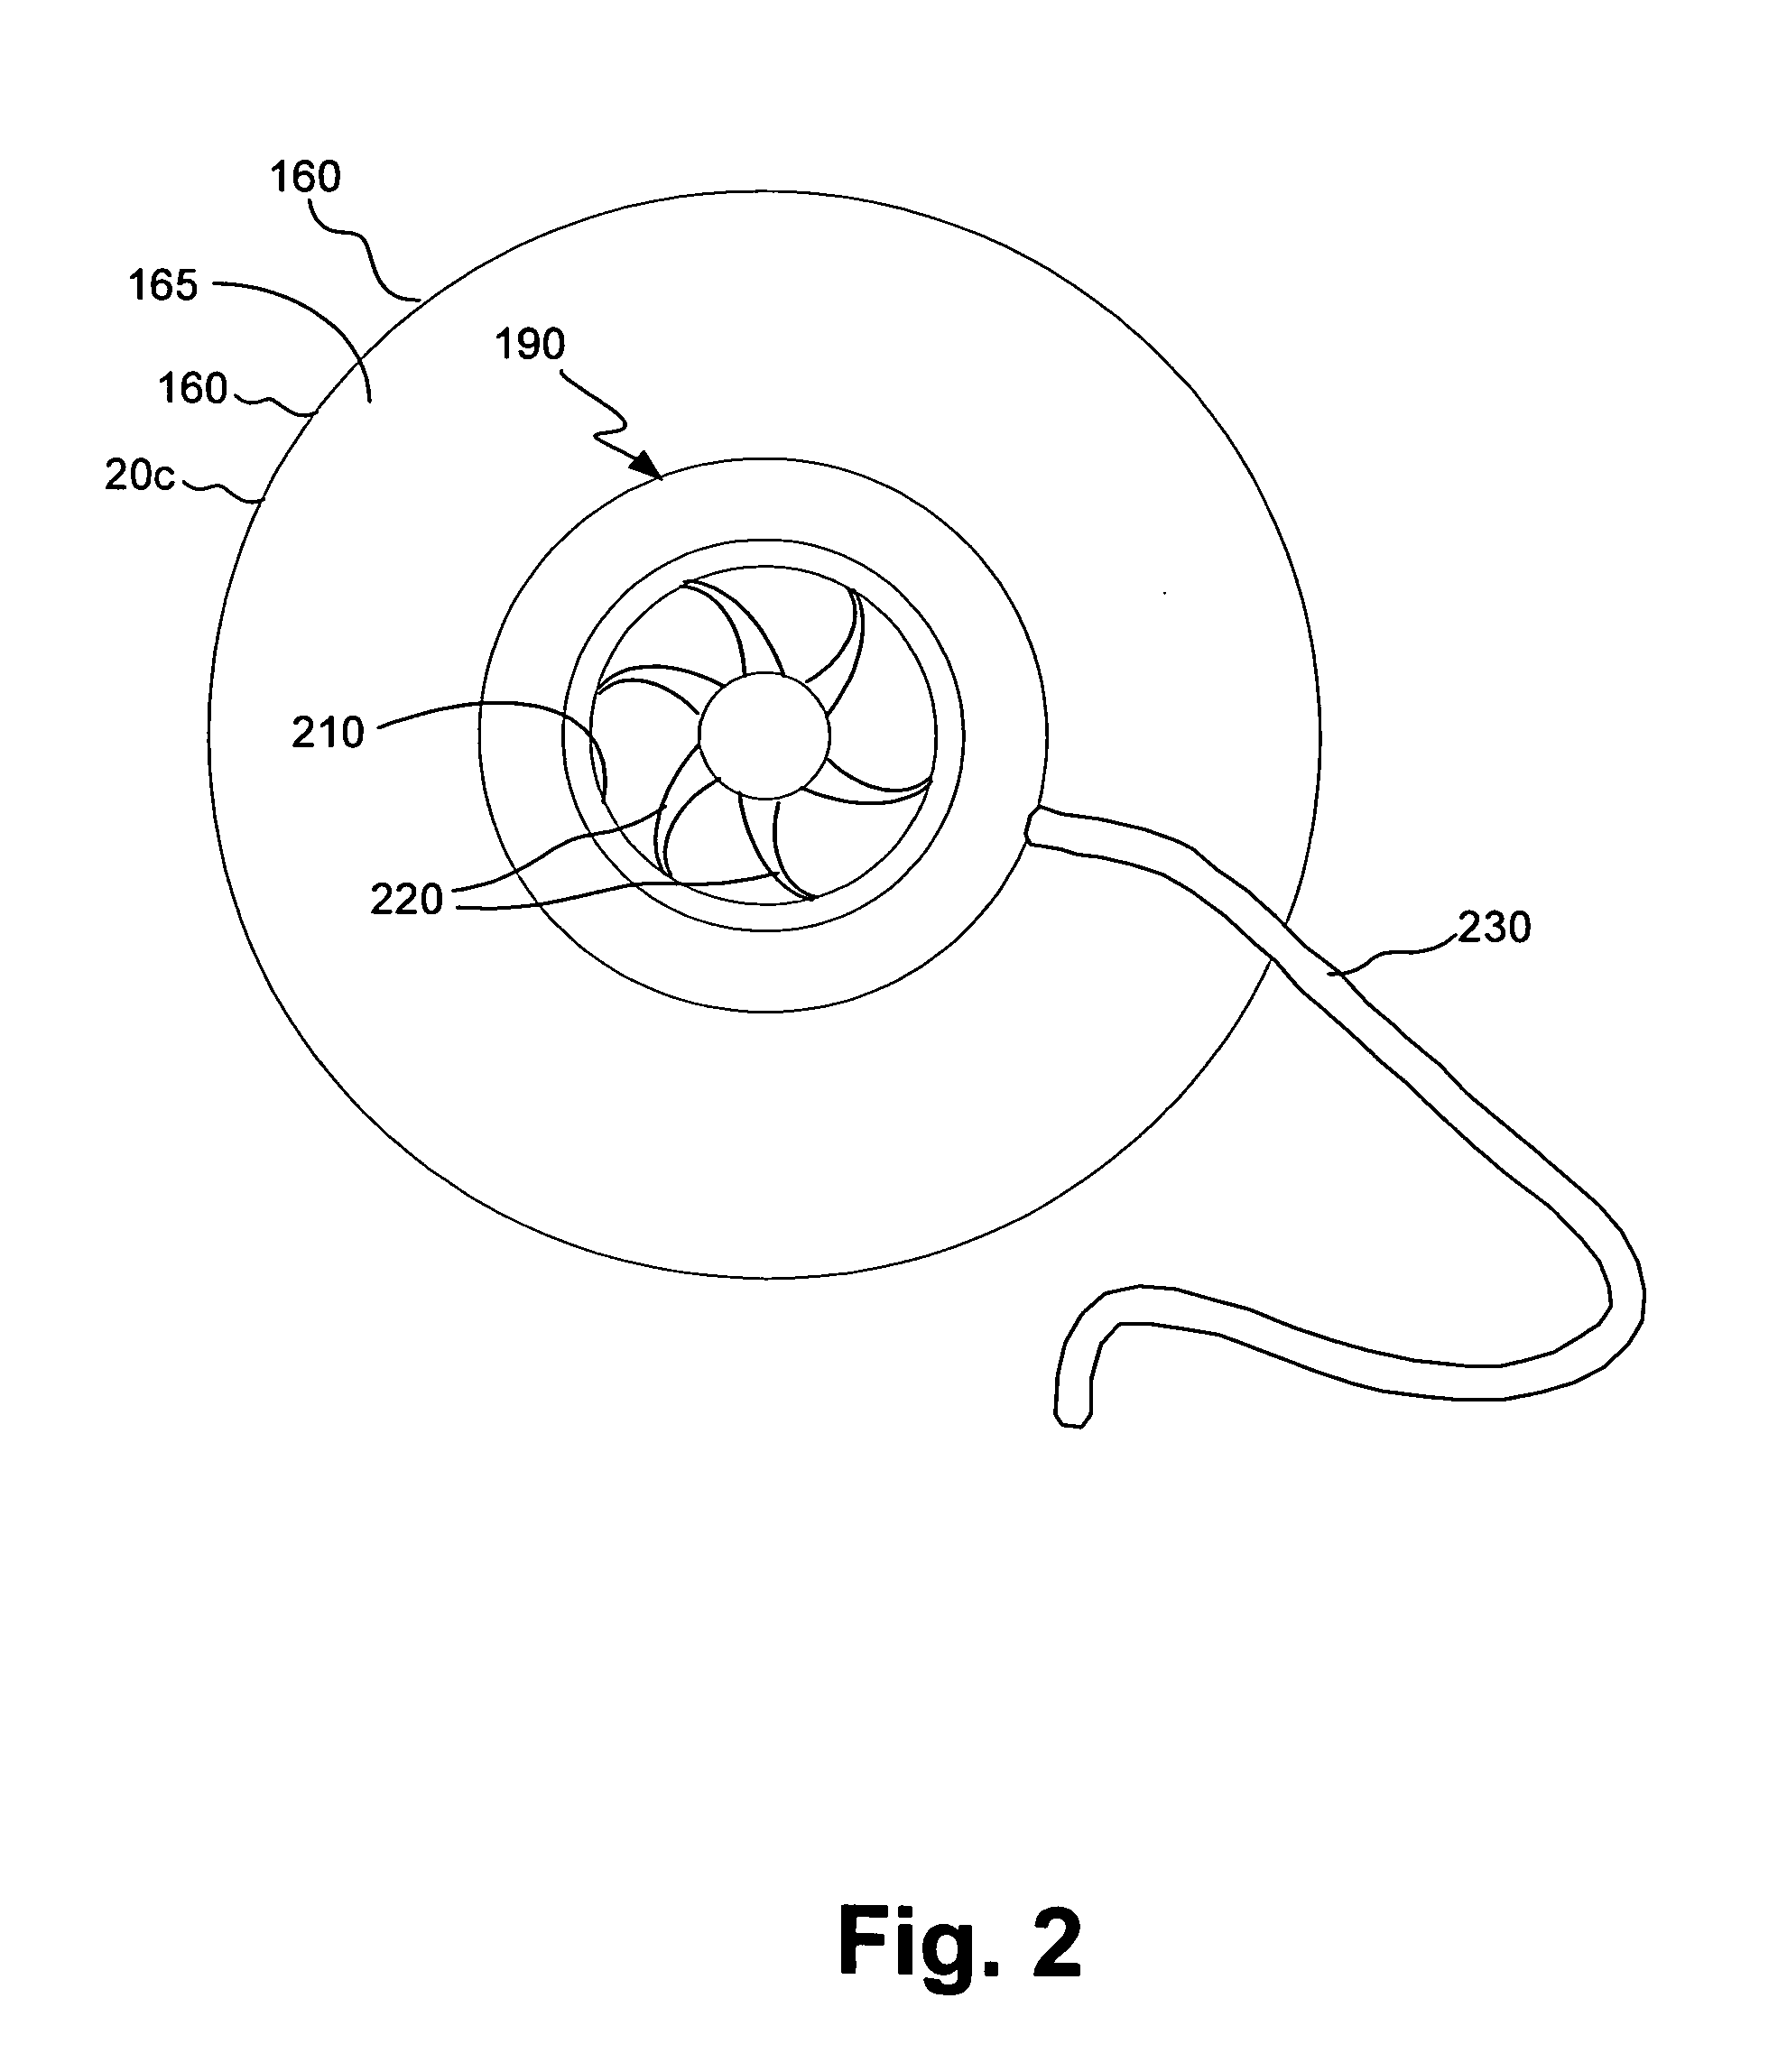 Segmented stackable filter assembly for filtering a gas and method of manufacturing same